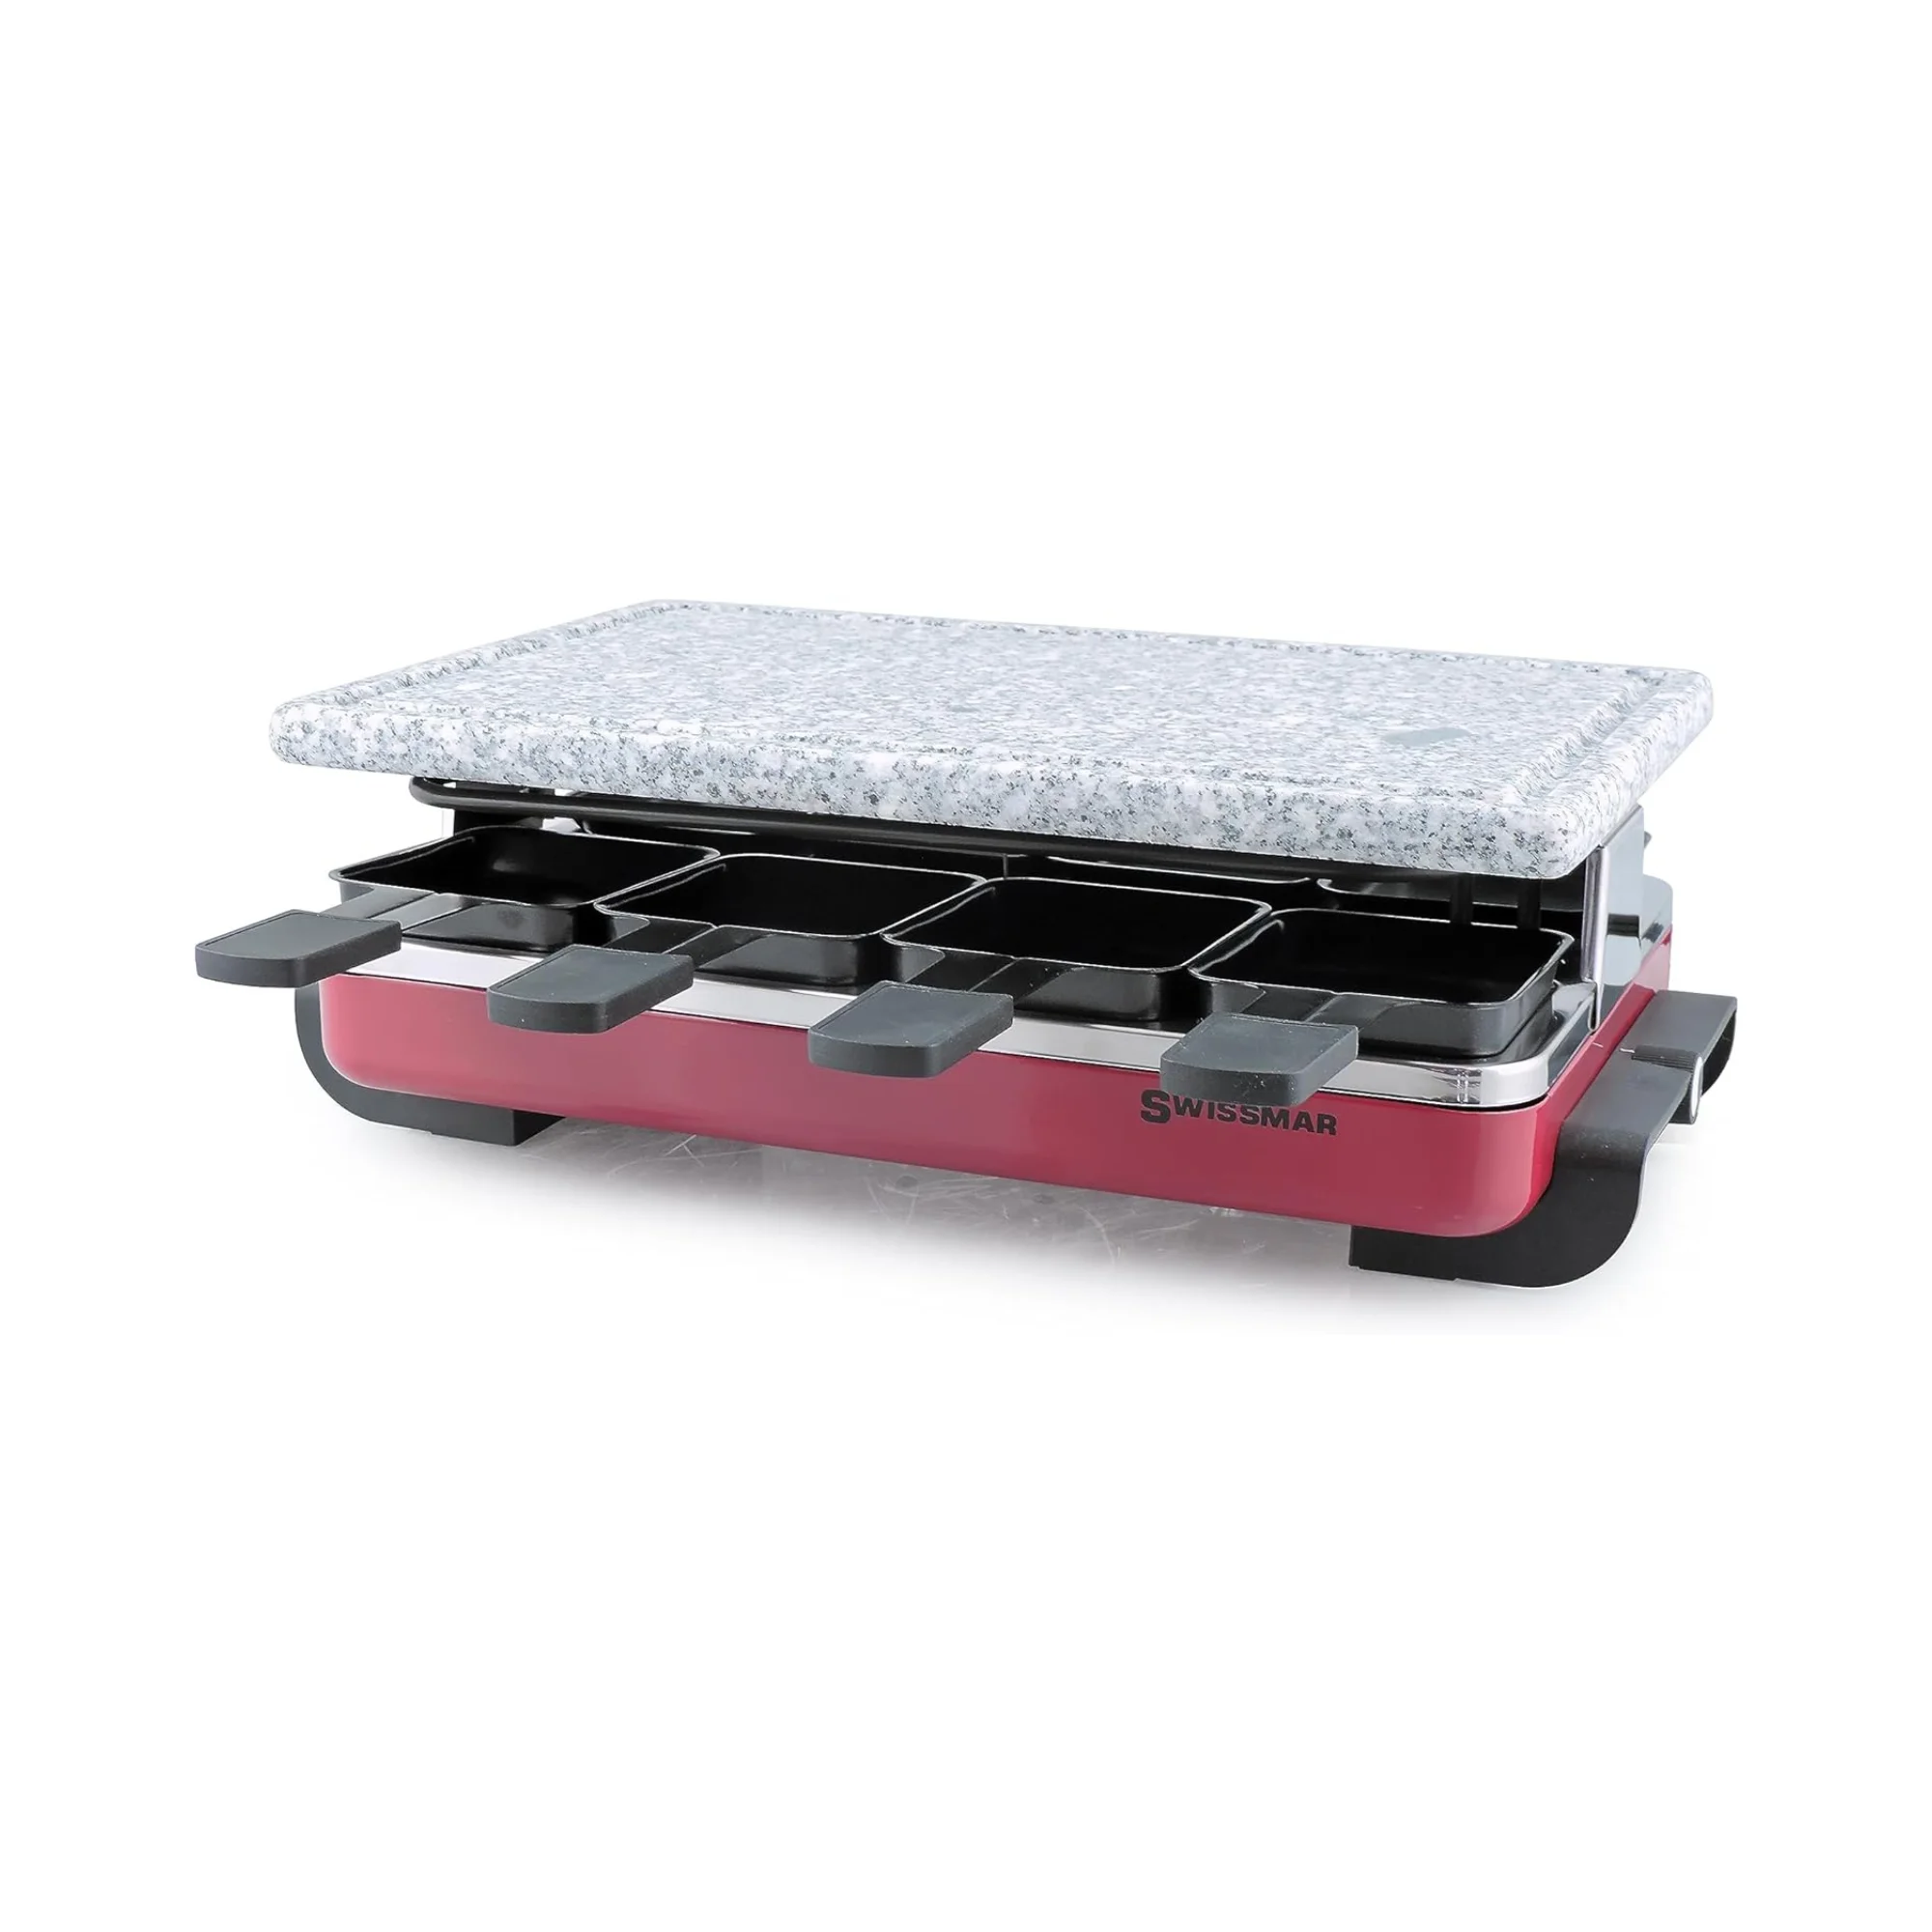 Swissmar Classic Red Raclette Grill with Granite Top 2